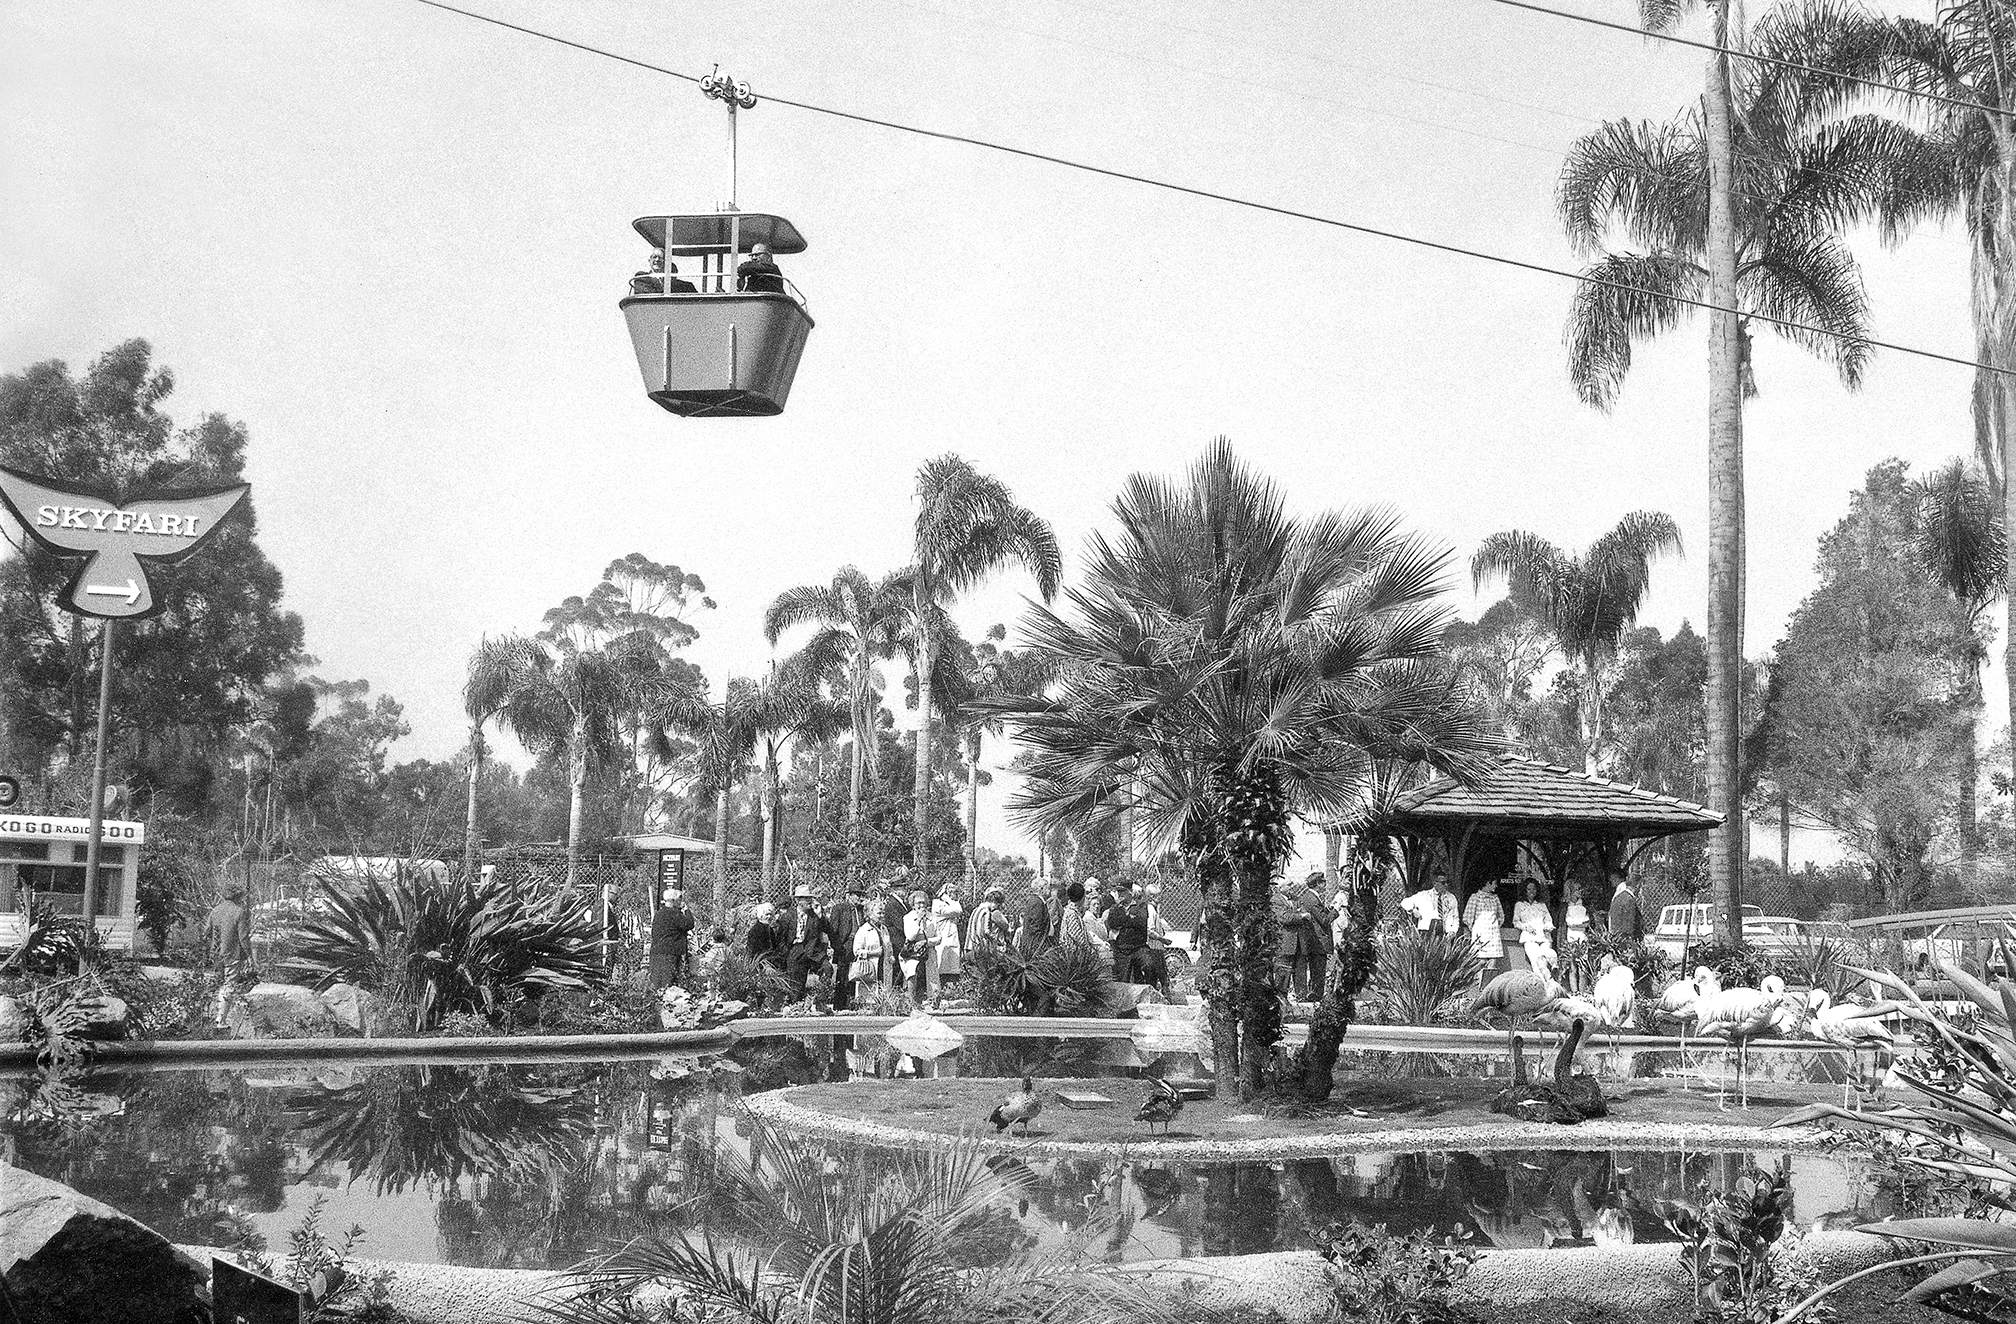 High adventure at the Zoo: Opening day for Skyfari was March 20, 1969, with a media event and ribbon cutting ceremony. The views from the first gondola off to the far side of the Zoo were enjoyed by radio and television personality Art Linkletter; Sam Lofting, San Diego deputy mayor; GeorgiAnn Amaguin, representing the children of San Diego; and Pat Johnson, a Western Airline stewardess.